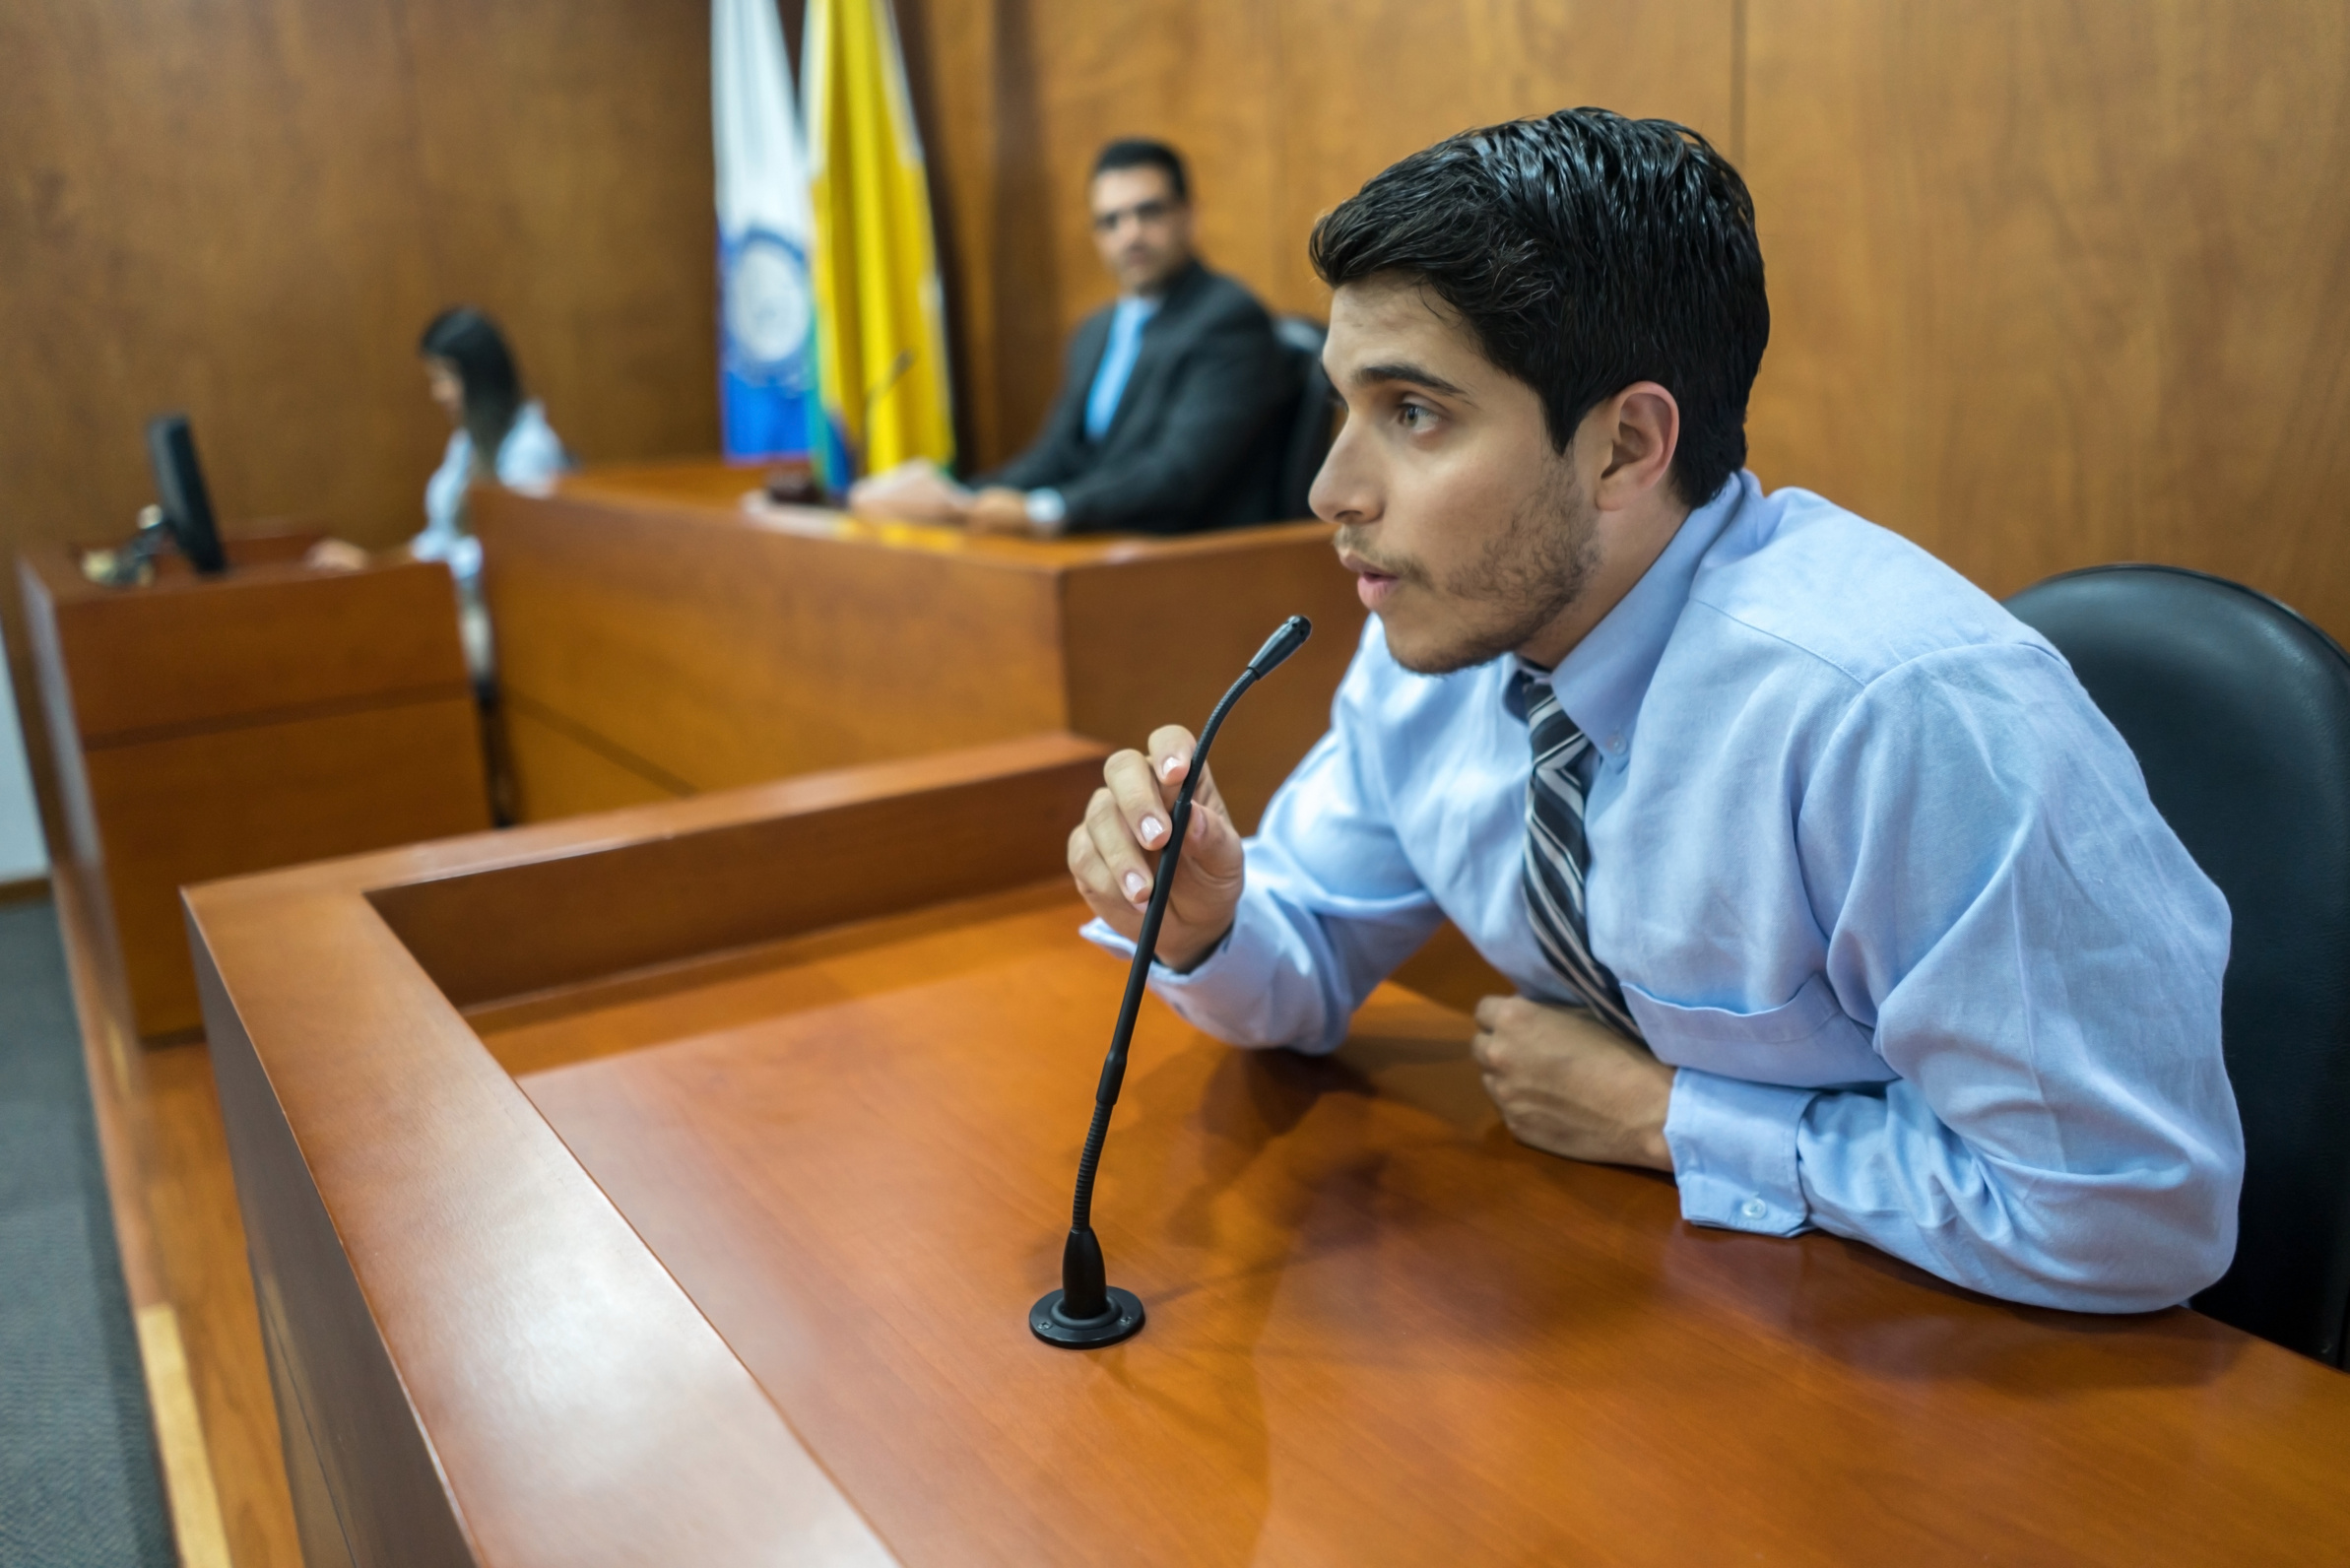 Witness addressing the courtroom in a trial